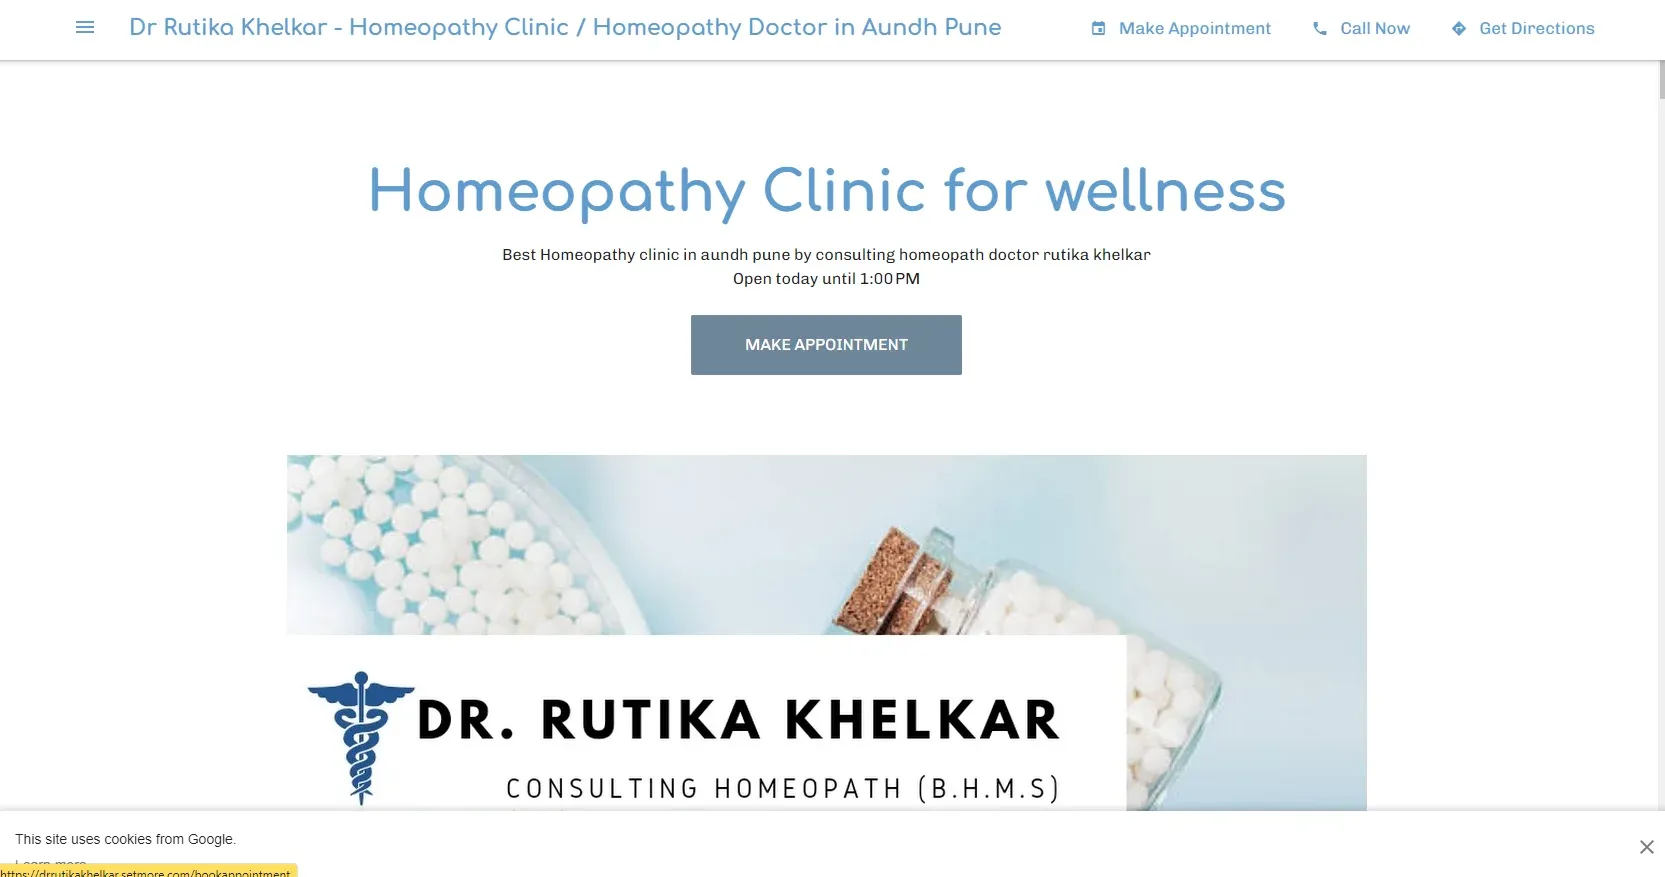 Homeopathy Clinic In Pune